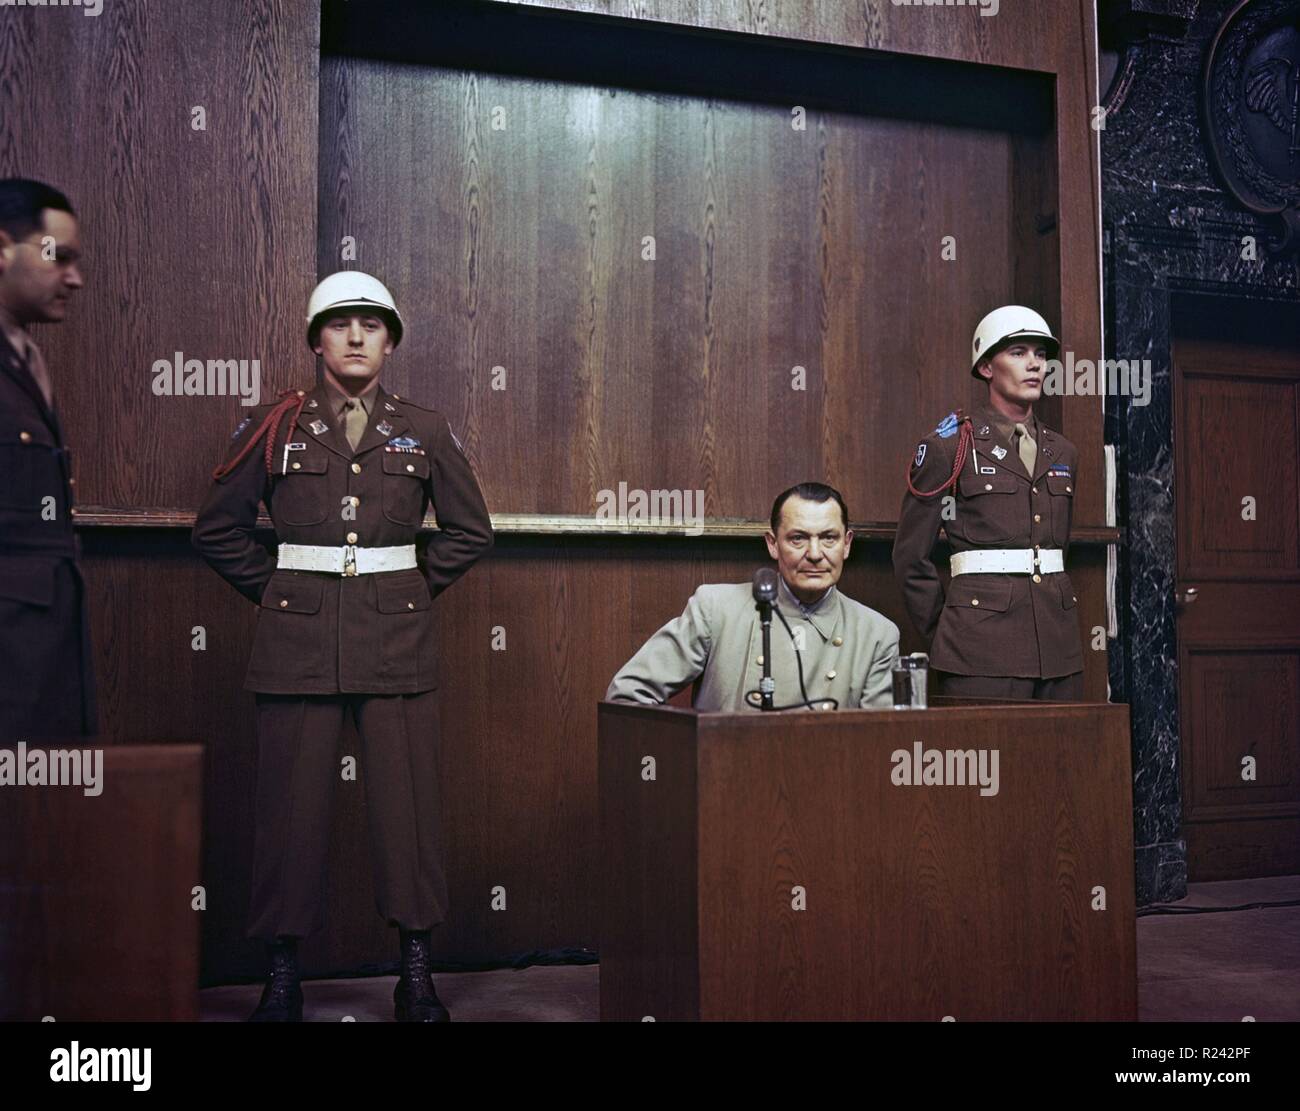 Hermann Wilhelm Goring ( 1893 - 15 October 1946) German politician, of the Nazi Party (NSDAP), on trial at the Nuremburg War Crimes Trials 1946 Stock Photo